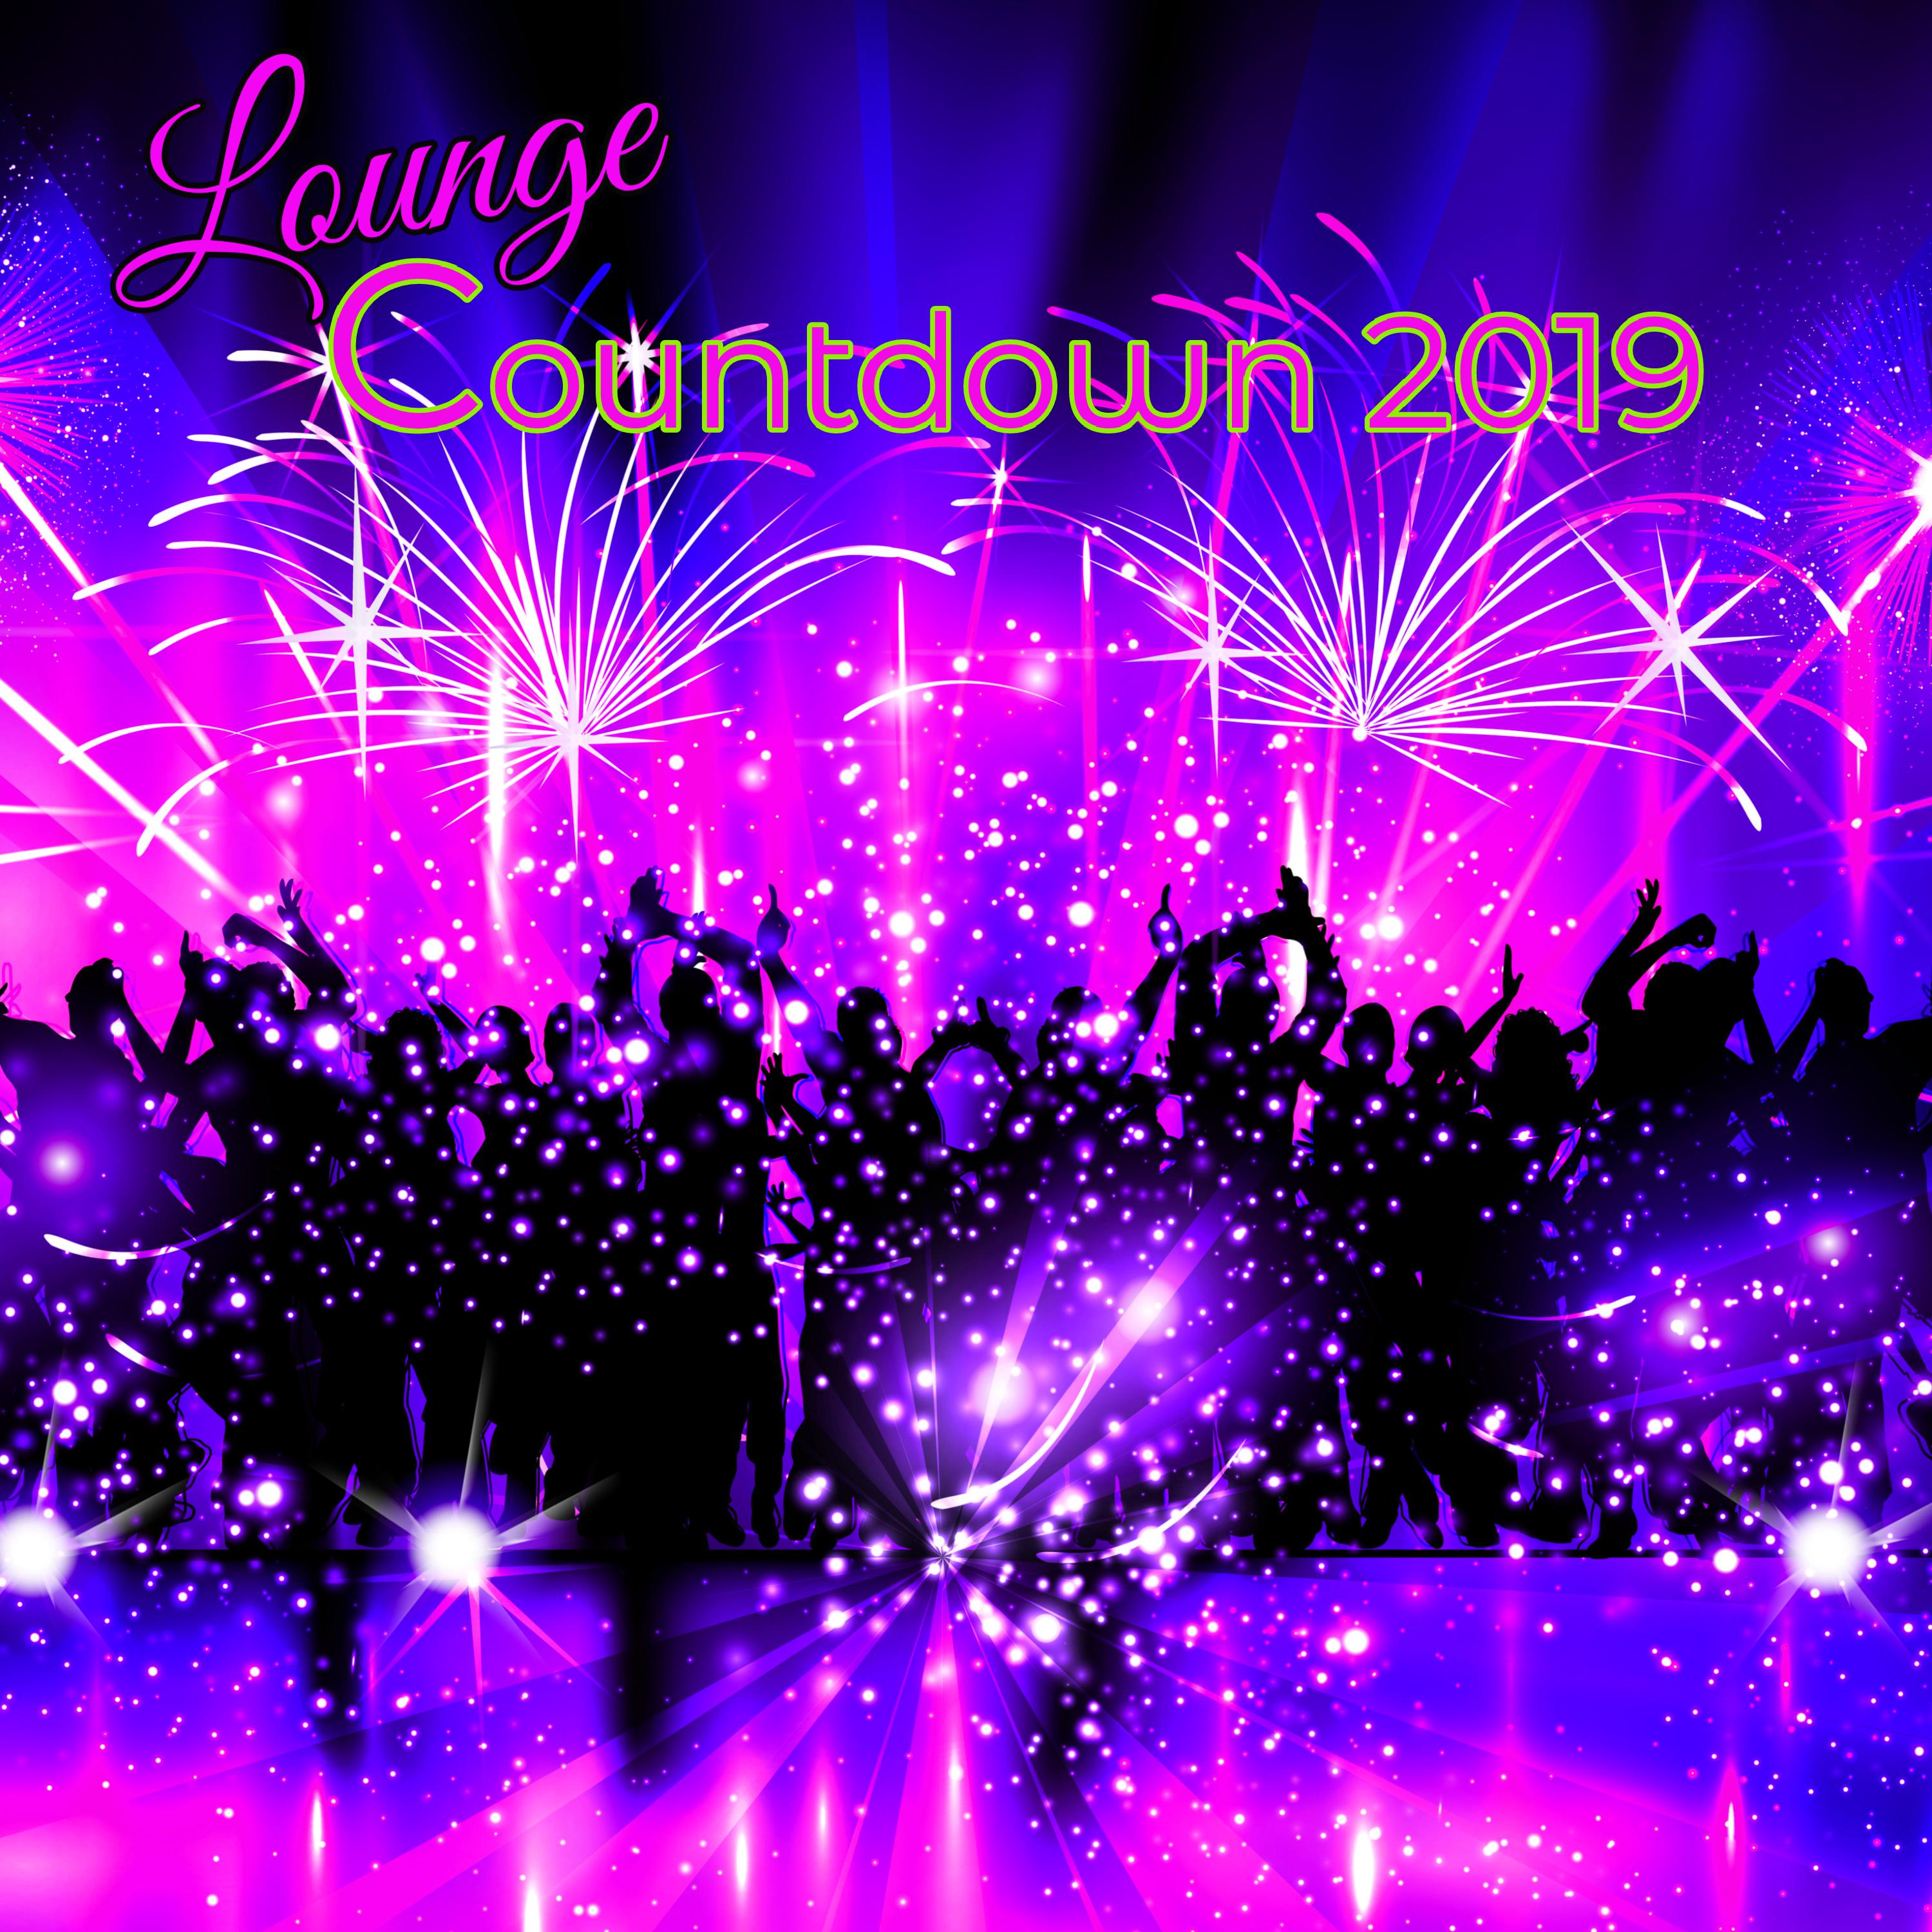 Lounge Countdown 2019 – Top 10 Lounge Songs Final Countdown to New Year 2019